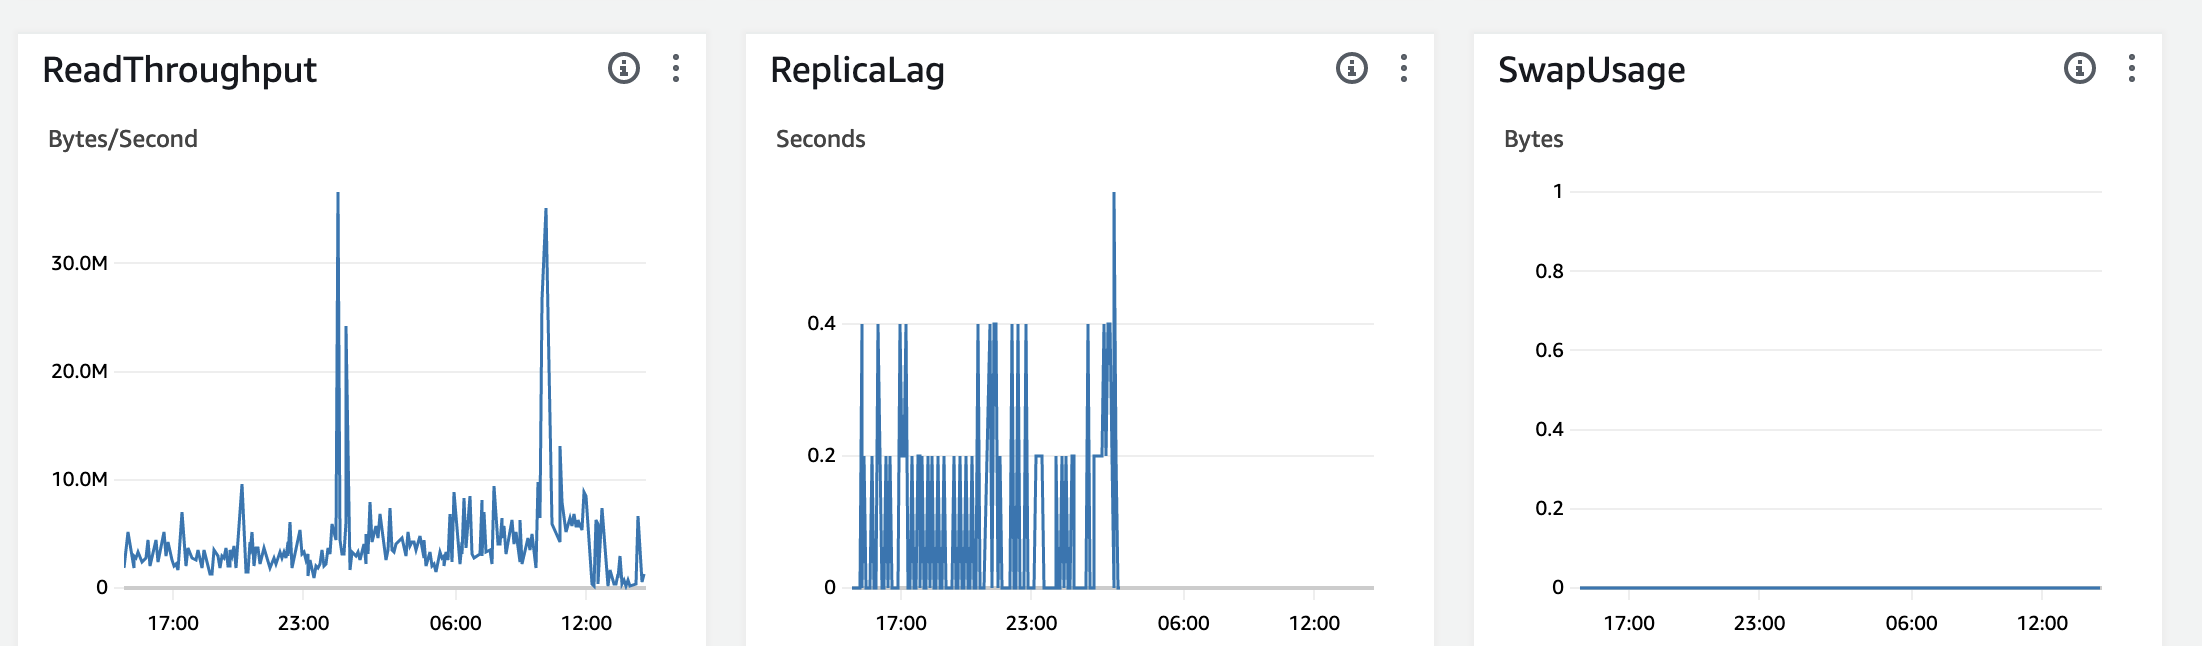 Image showing RDS monitoring console. ReplicaLag metric stops abruptly while other metrics continue to have data 